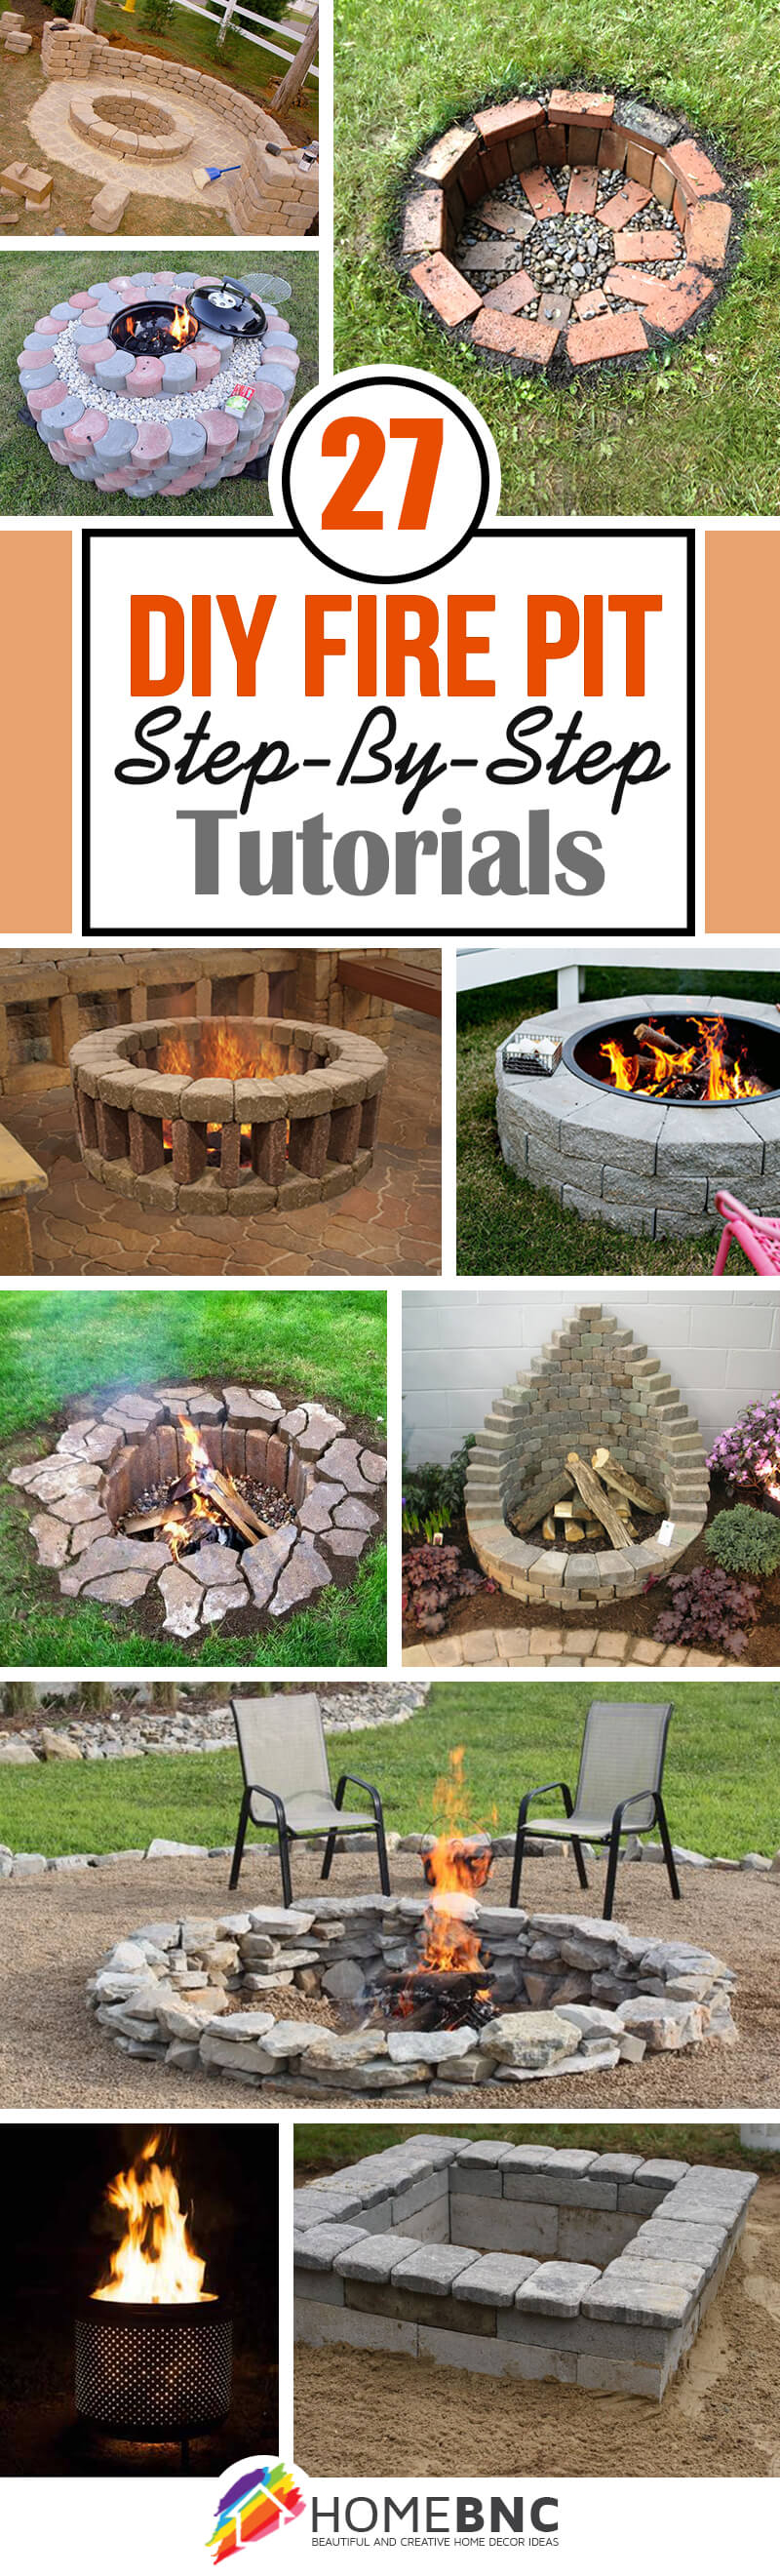 27 Best Diy Firepit Ideas And Designs, Small Yard Fire Pit Ideas